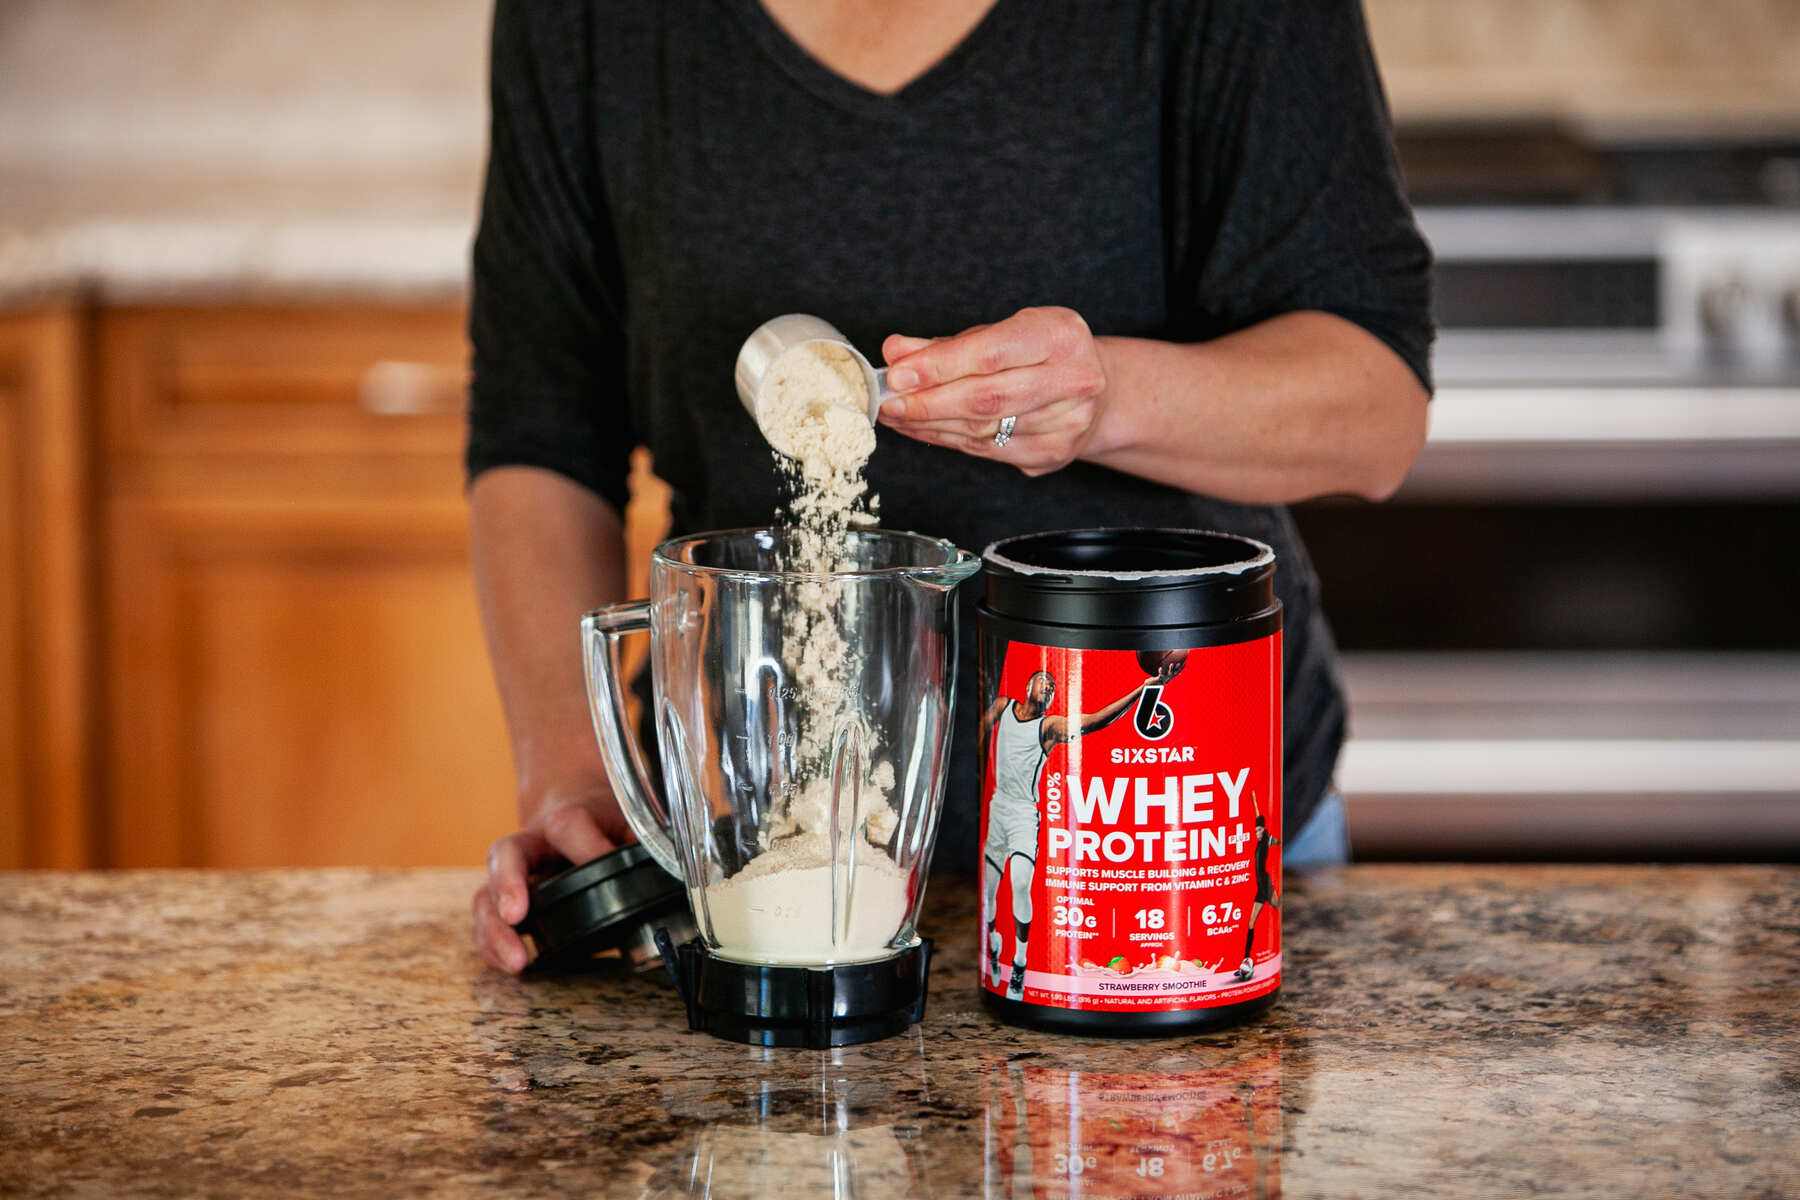 Person in a black top pouring whey protein powder into a blender next to a red container of Six Star Whey Protein on a kitchen counter